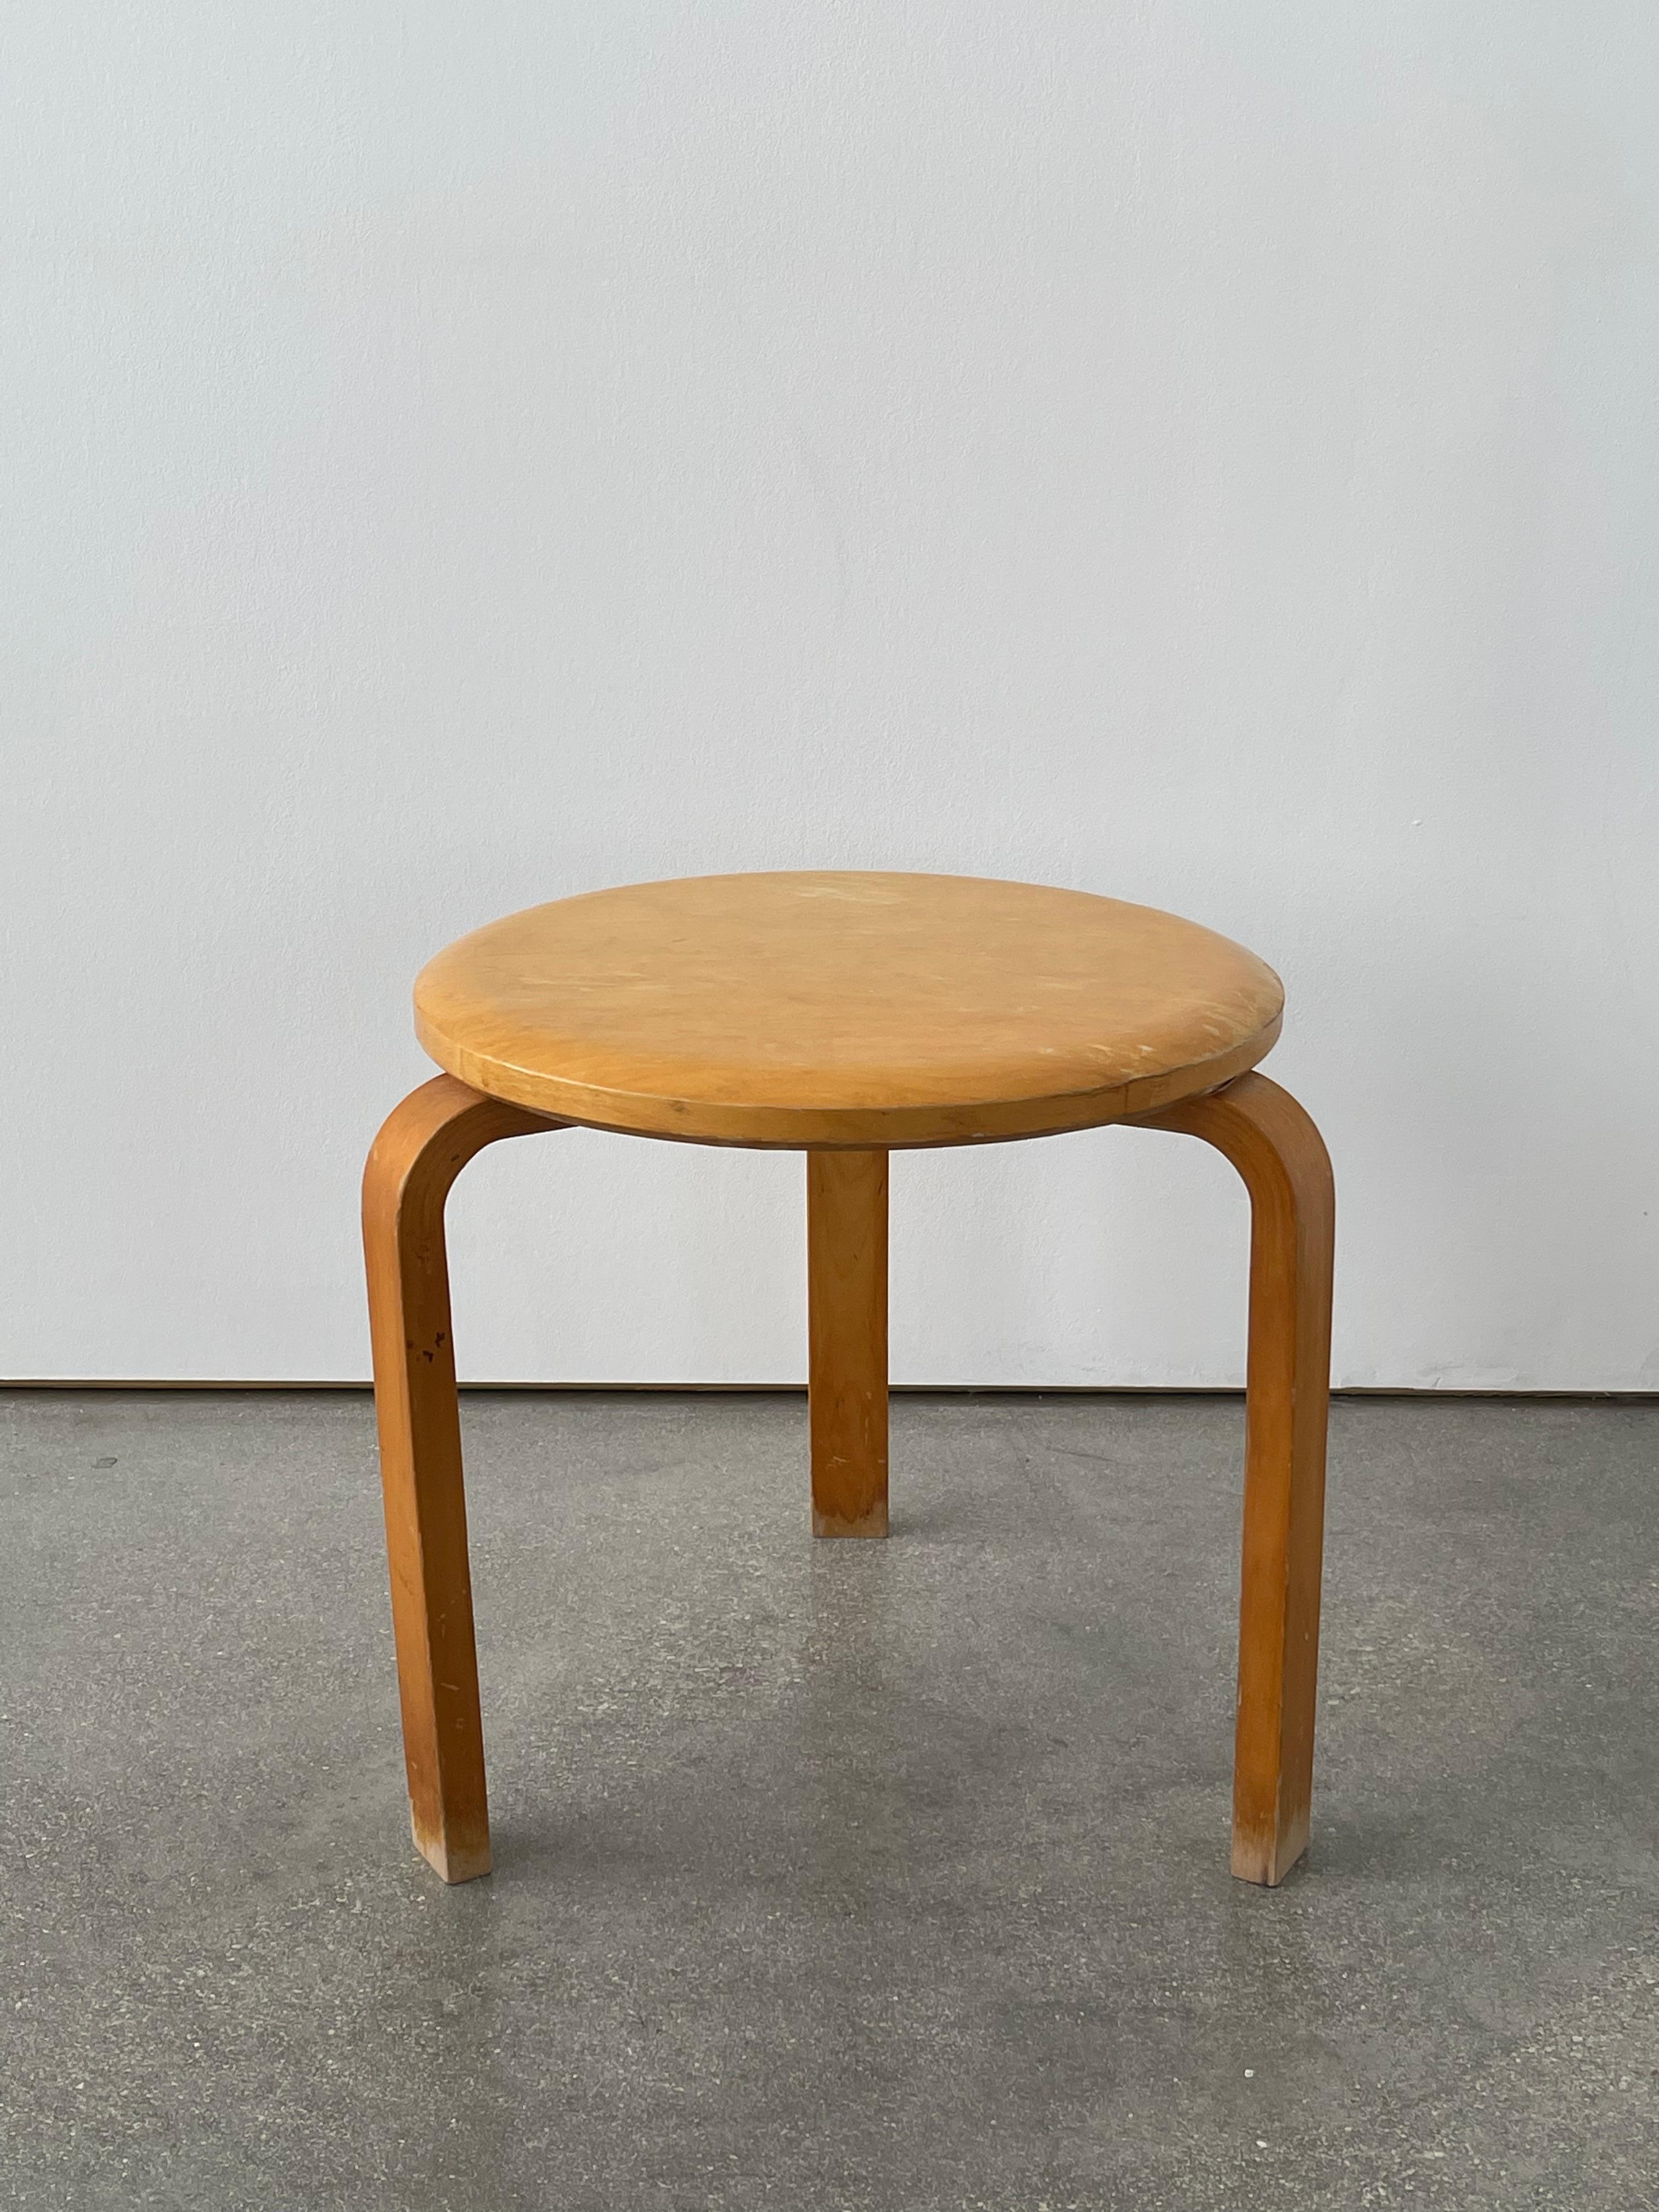 1940's Alvar Aalto Birch stool with a shaped wooden top veneered in birch. 3 Bent wood legs with a four screw attachment. Stamped 